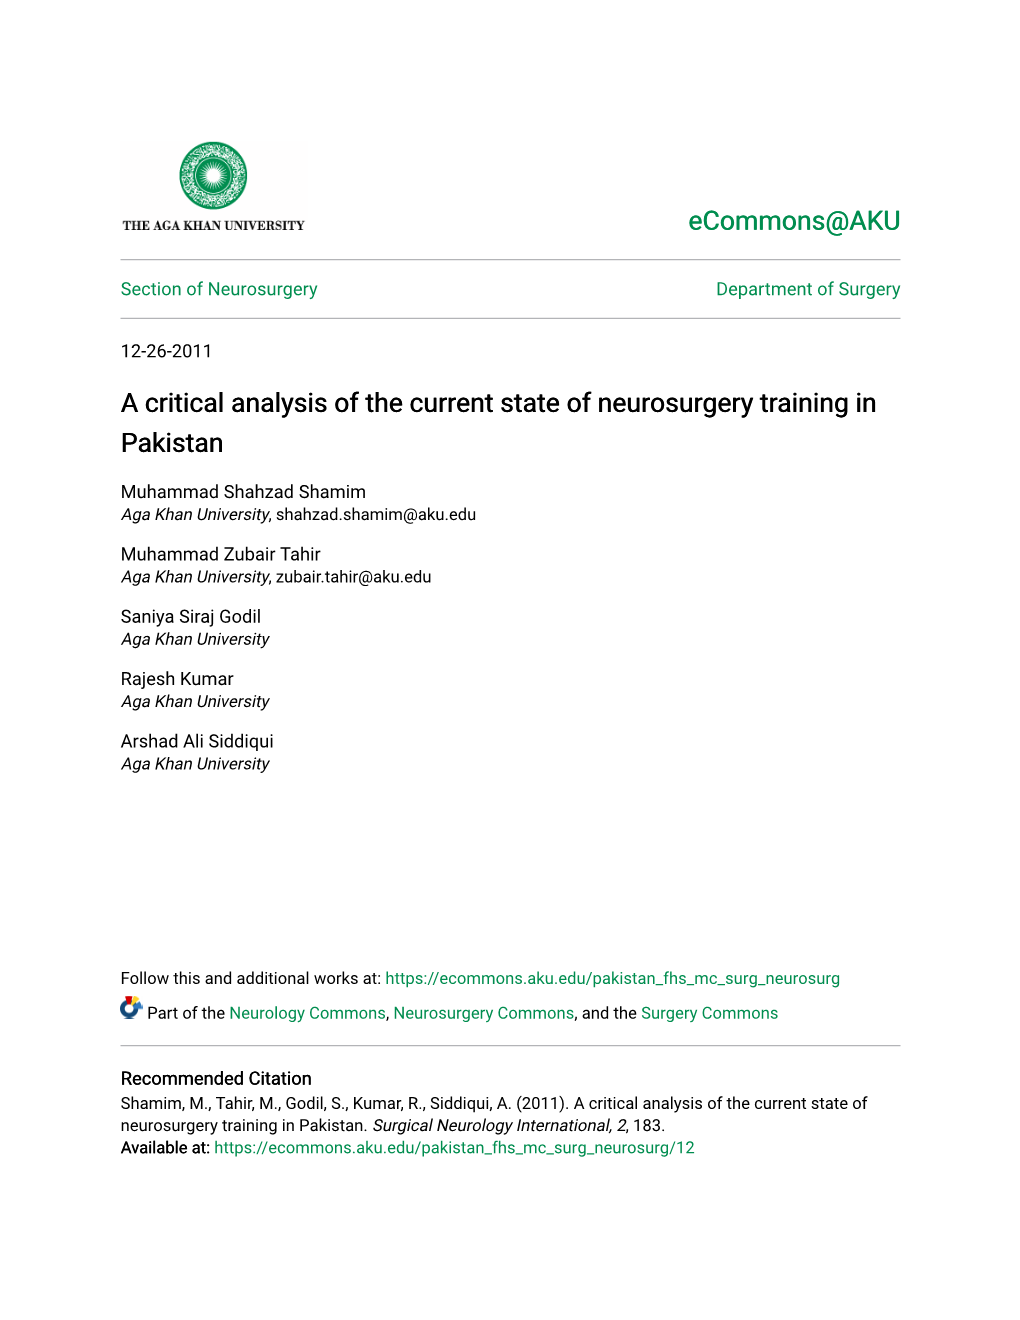 A Critical Analysis of the Current State of Neurosurgery Training in Pakistan